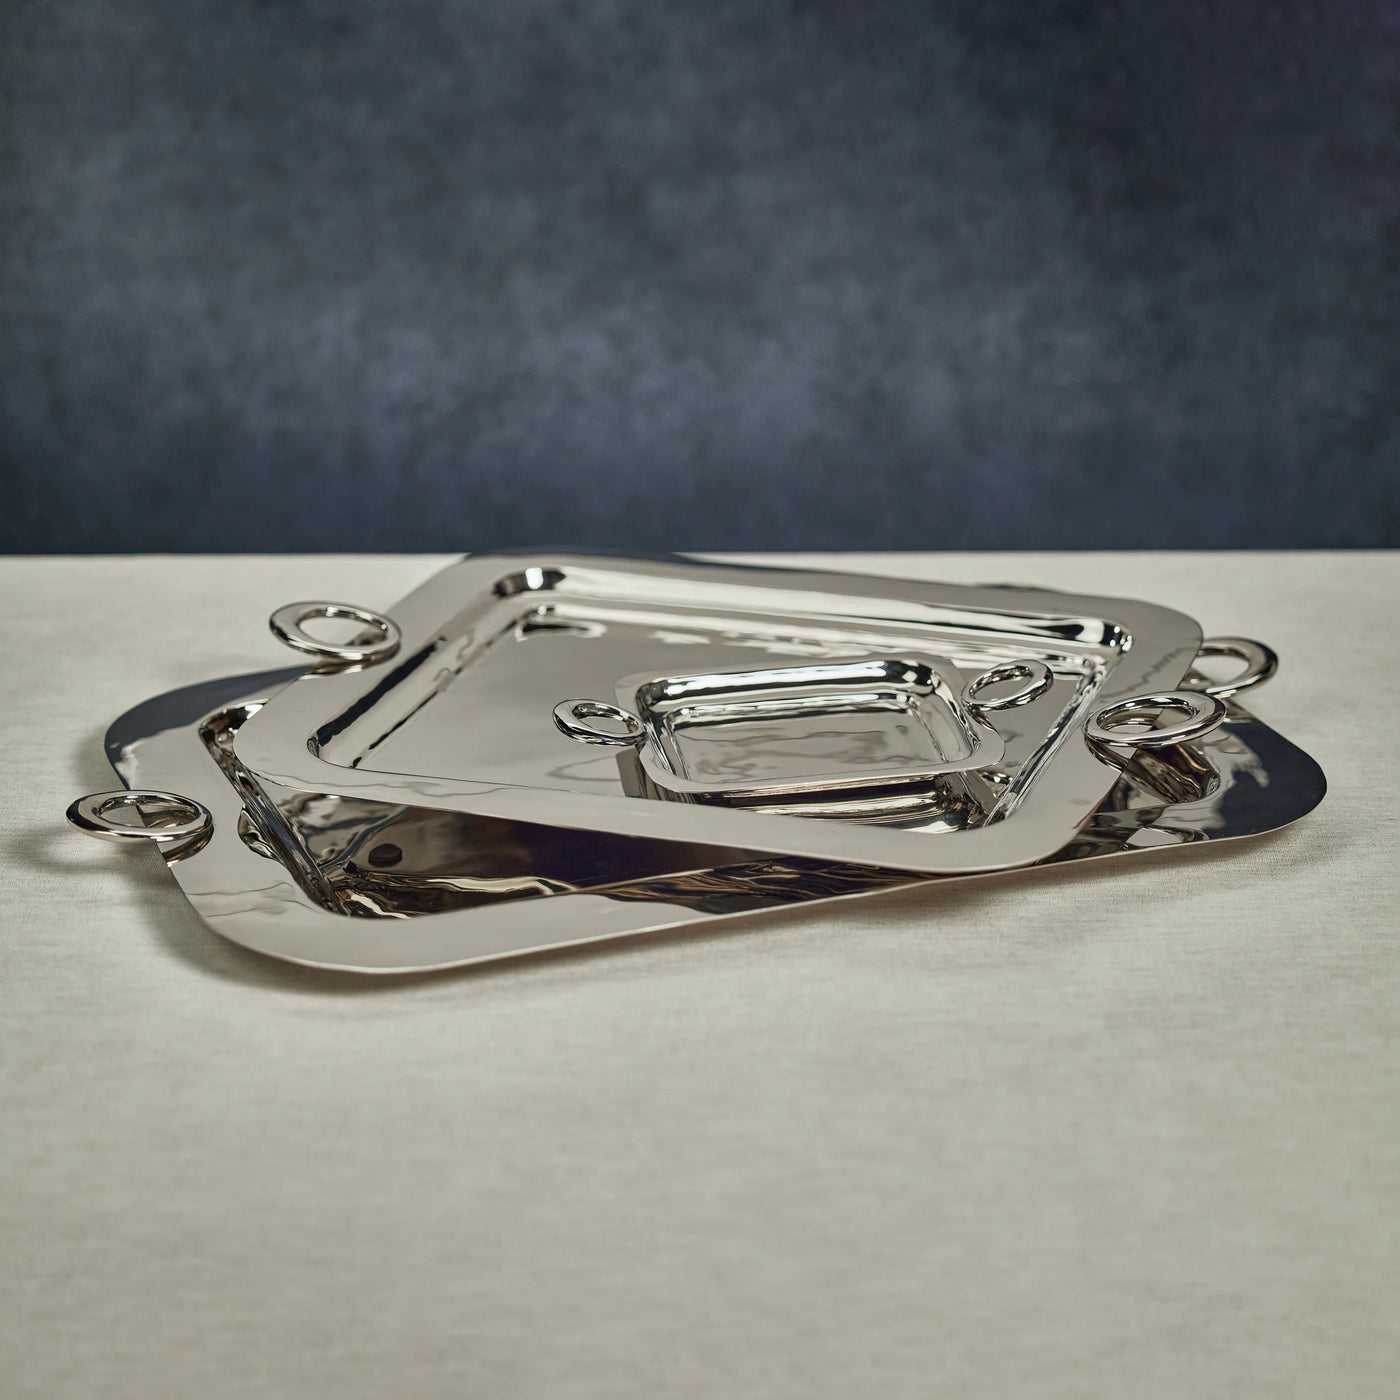 TRAY SERVING POLISHED BRASS (Available in 3 Sizes)